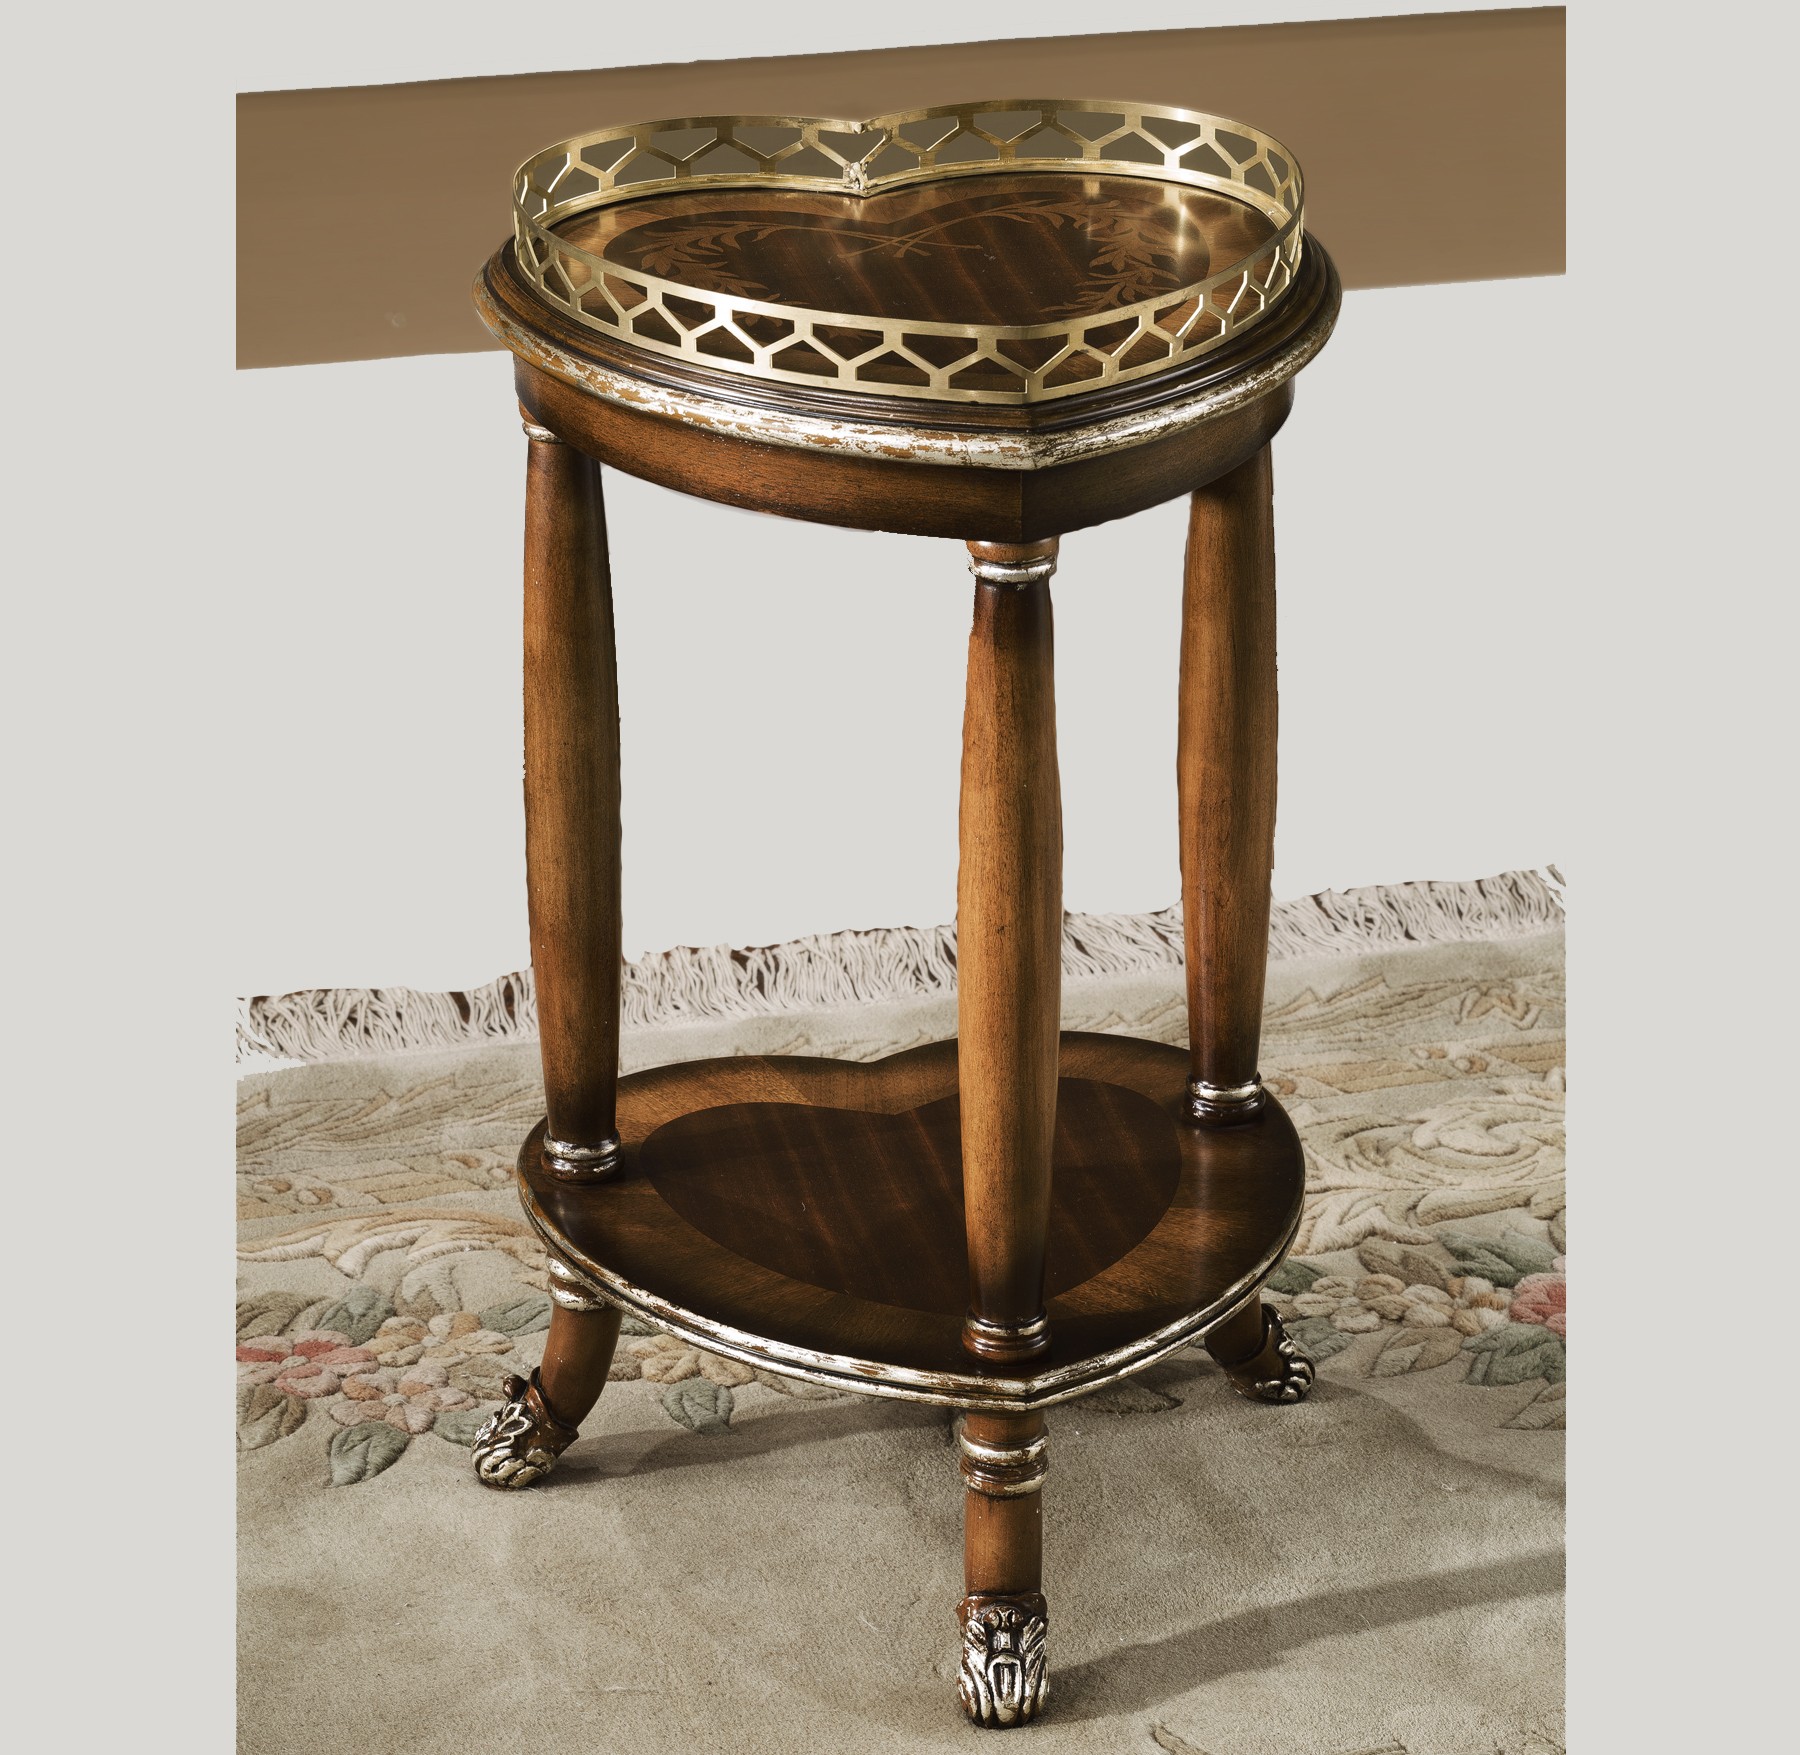 Bolton Occasional Table in Antique Cognac finish